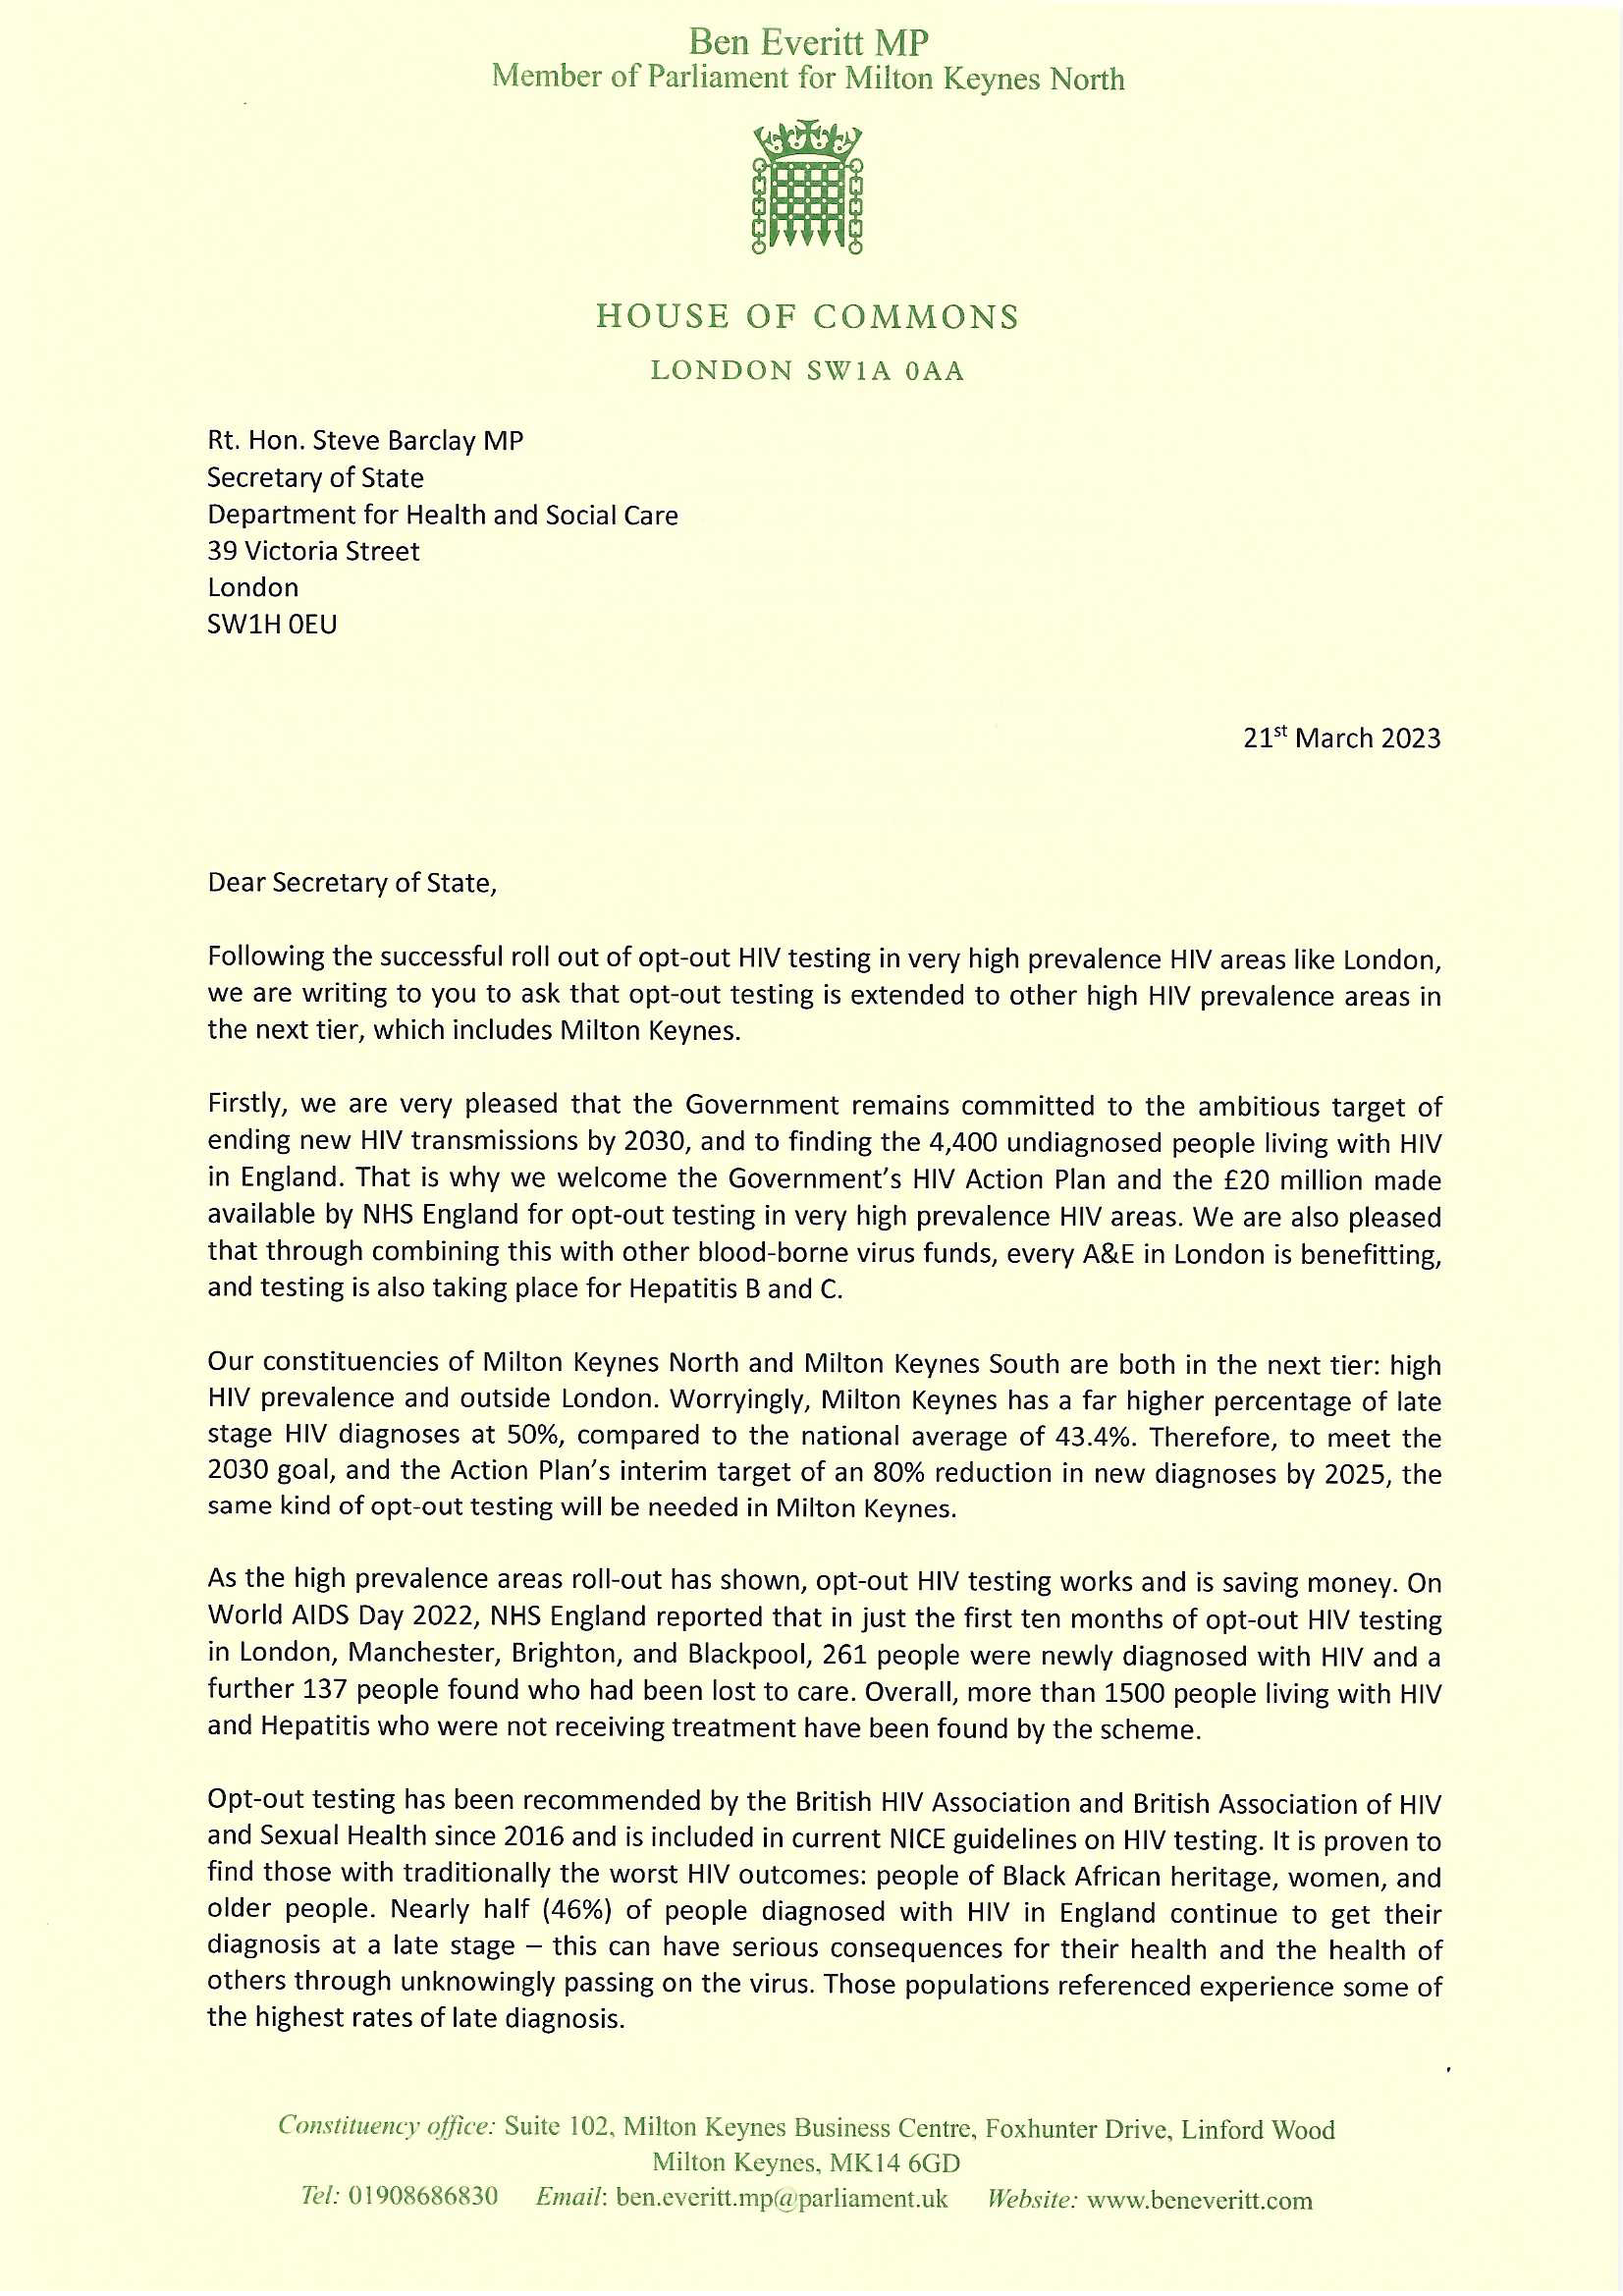 Part 1 of Iain Stewart MP and Ben Everitt MP letter on HIV testing to Steve Barclay